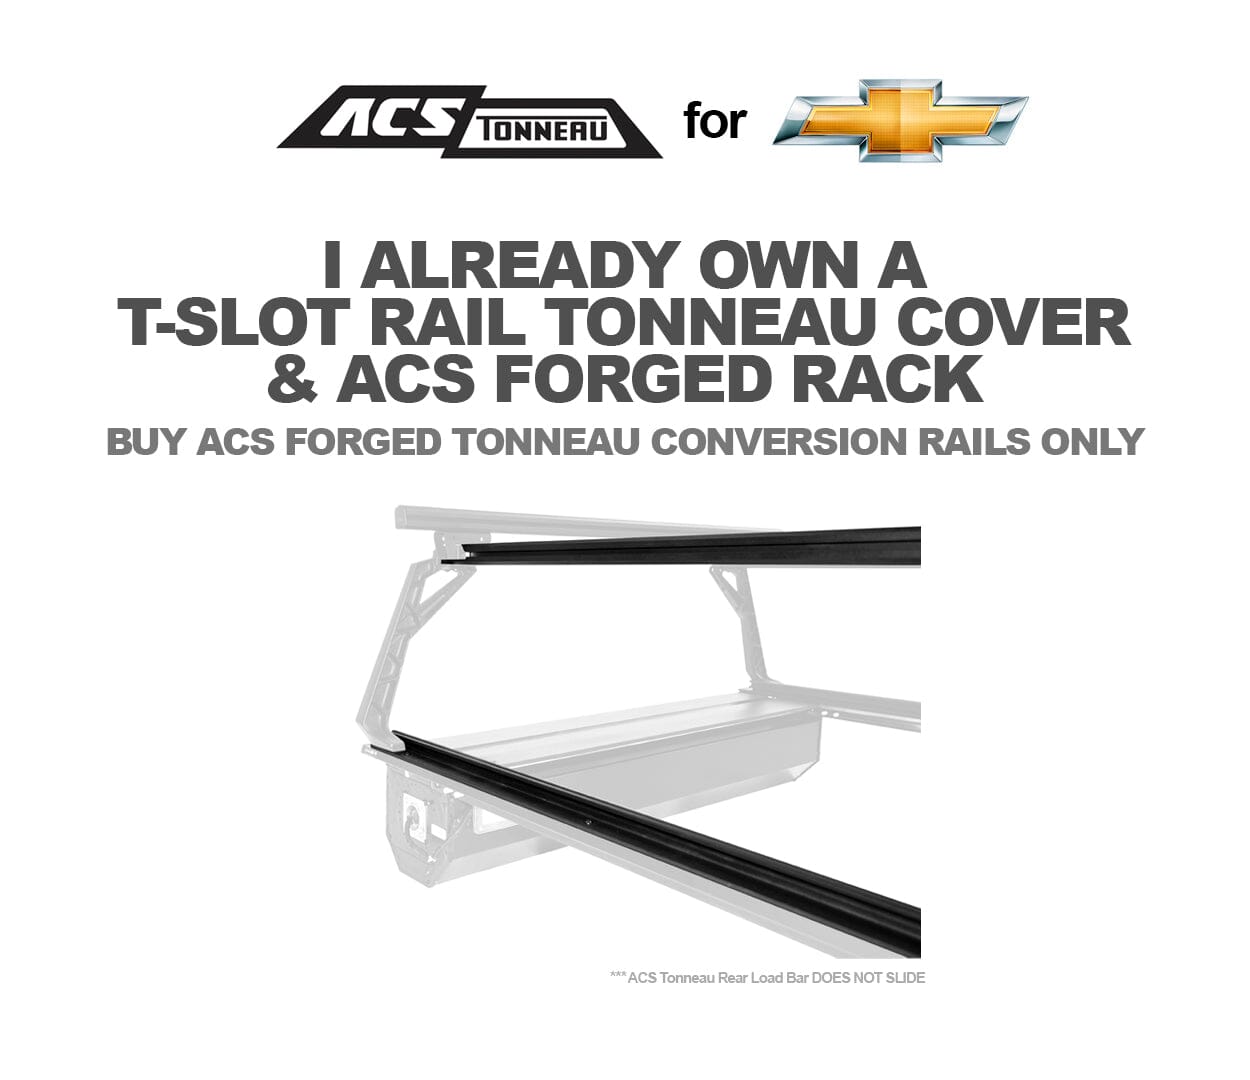 ACS Forged Tonneau - Rails Only - Chevrolet  active-cargo-system Leitner Designs- Overland Kitted